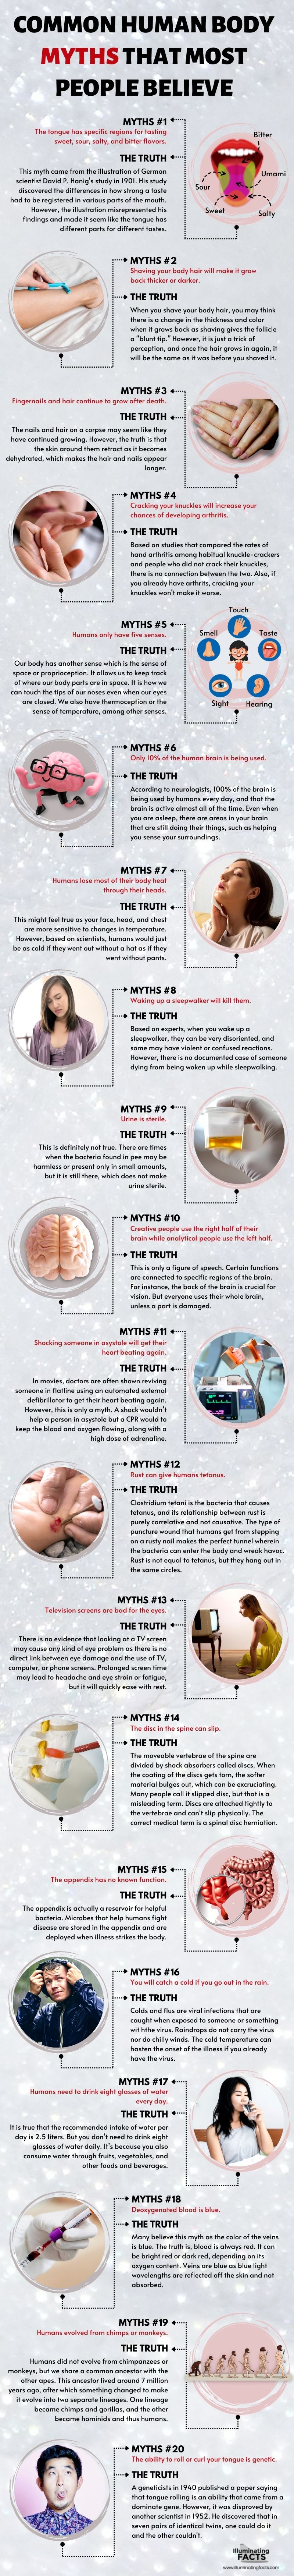 COMMON HUMAN BODY MYTHS THAT MOST PEOPLE BELIEVE